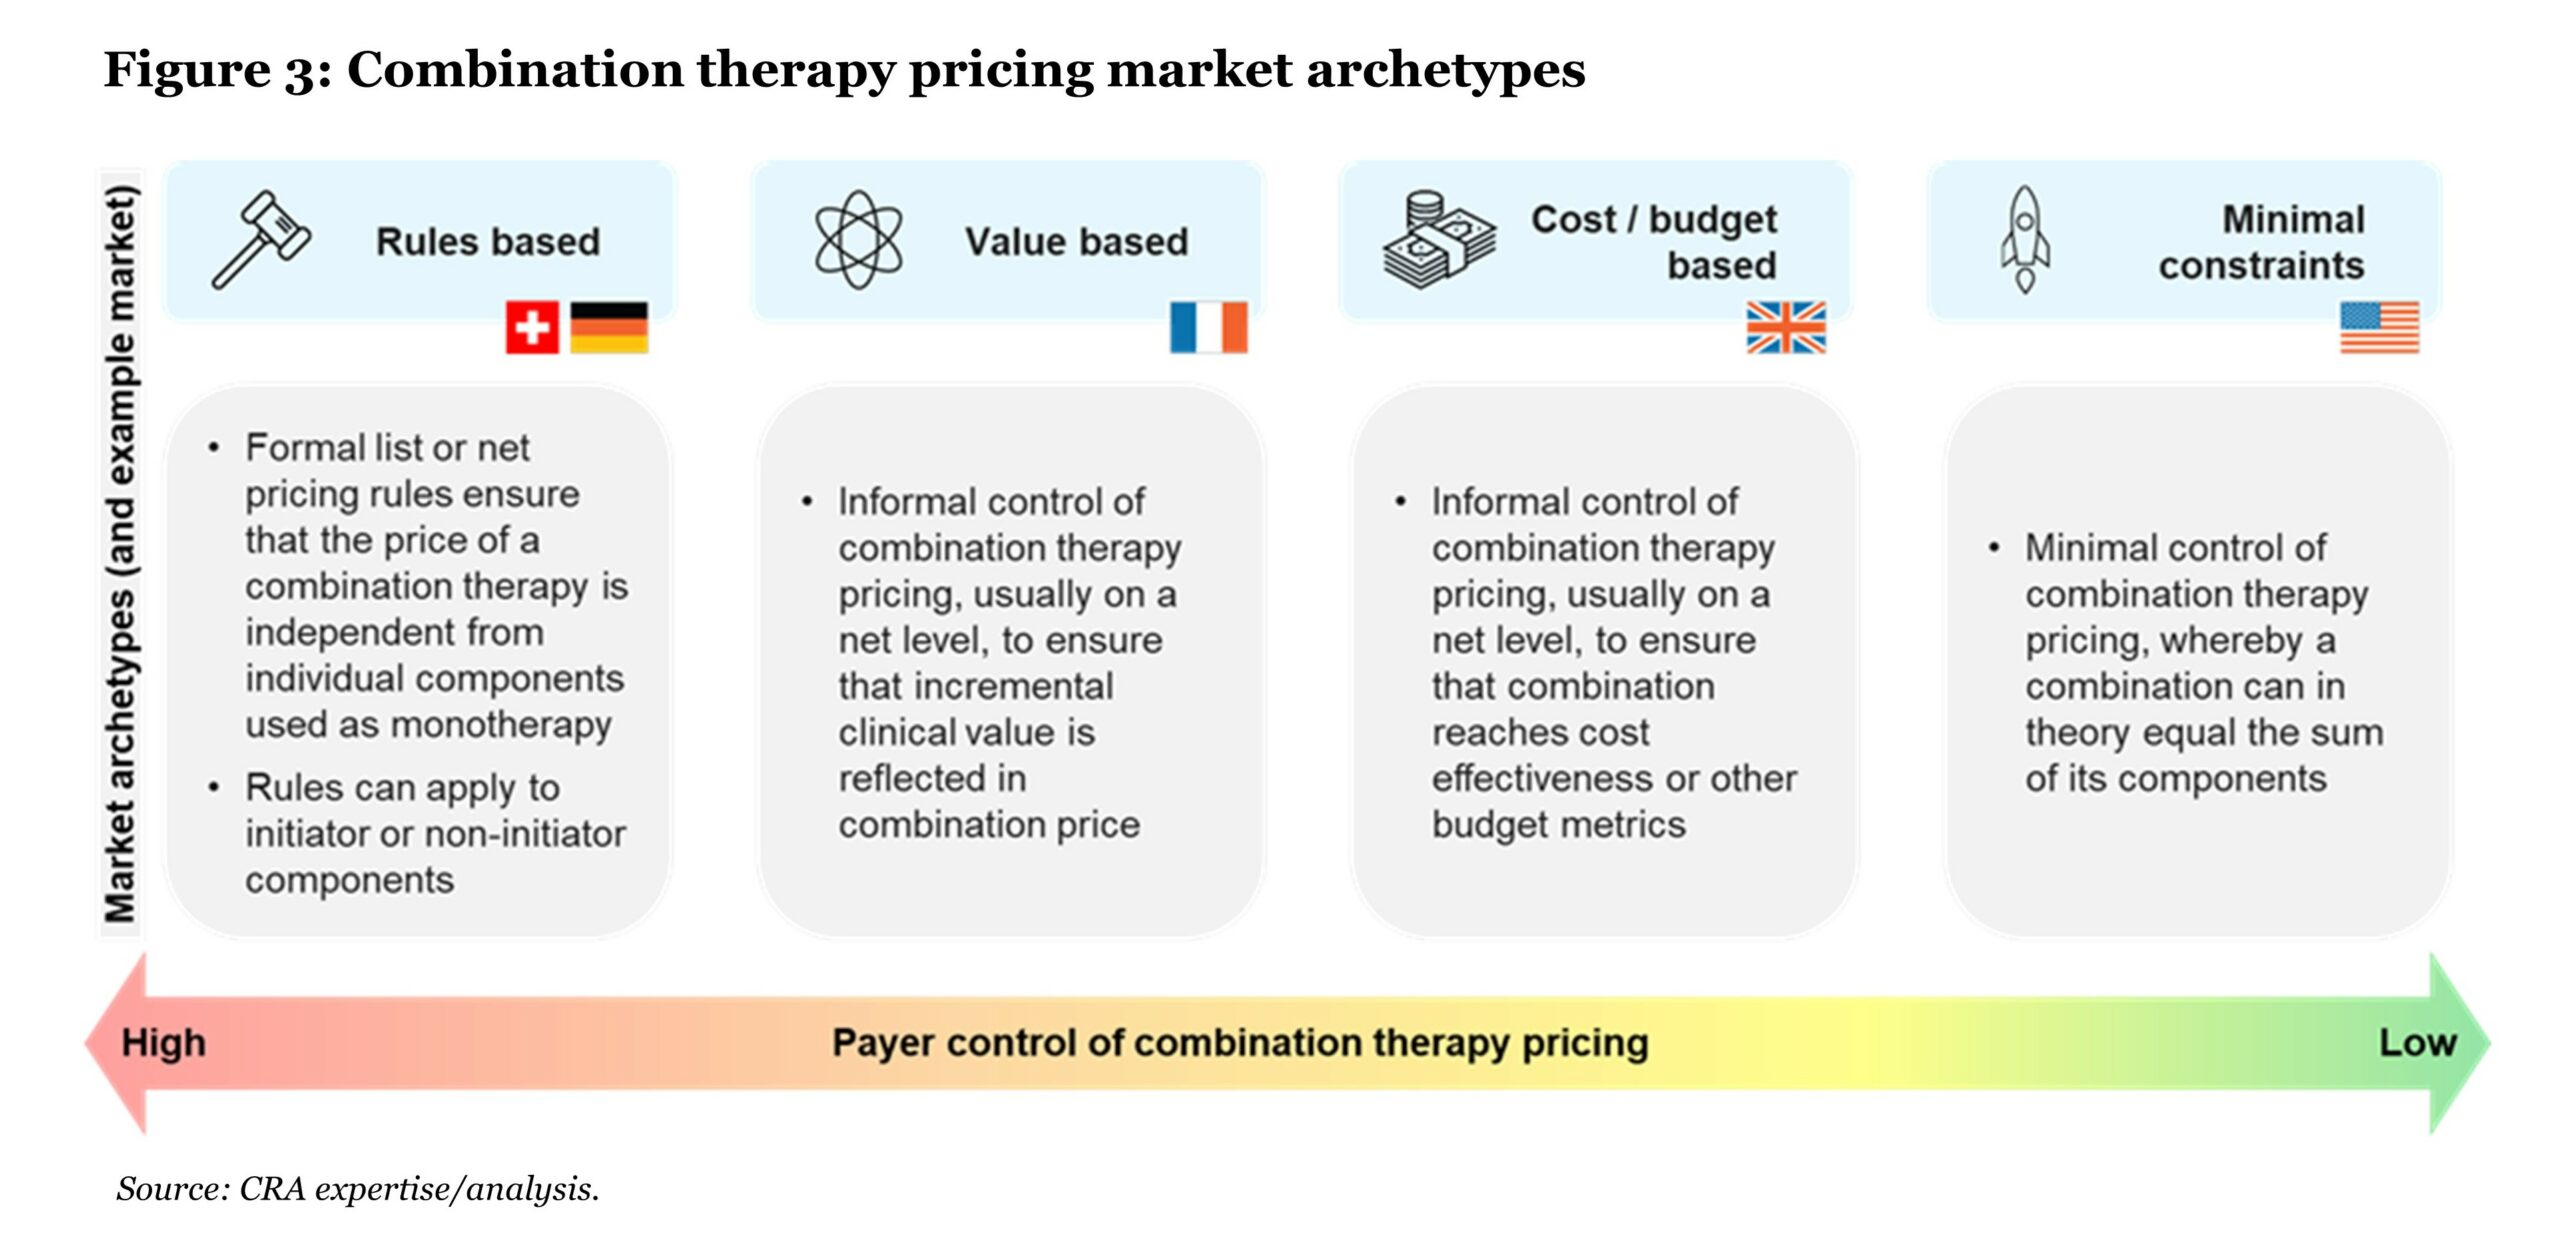 Figure 3 shows the combination therapy pricing market archetypes. From left to right, with those closer to the left-hand side being examples of payers having higher control over pricing and the level of control decreasing as we move toward the examples listed on the right-hand side, the four examples are: Rules Based, Value Based, Cost/Budget Based, and Minimal Constraints. In Rules Based (used in Switzerland and Germany), formal list or net pricing rules ensure that the price of a combination therapy is independent from the individual components used as a monotherapy. Also, rules can apply to initiator or non-initiator components. In Value Based (used in France), its involves informal control of combination therapy pricing, usually on a net level, to ensure that incremental clinical value is reflected in combination price. In Cost/Budget based (used in the U.K.), it involves informal control of combination therapy, usually on a net level, to ensure that combination reaches cost effectiveness or other budget metrics. In Minimal Contracts (used in the U.S.), it involves minimal control of combination therapy pricing, whereby a combination can in theory equal the sum of its components. 